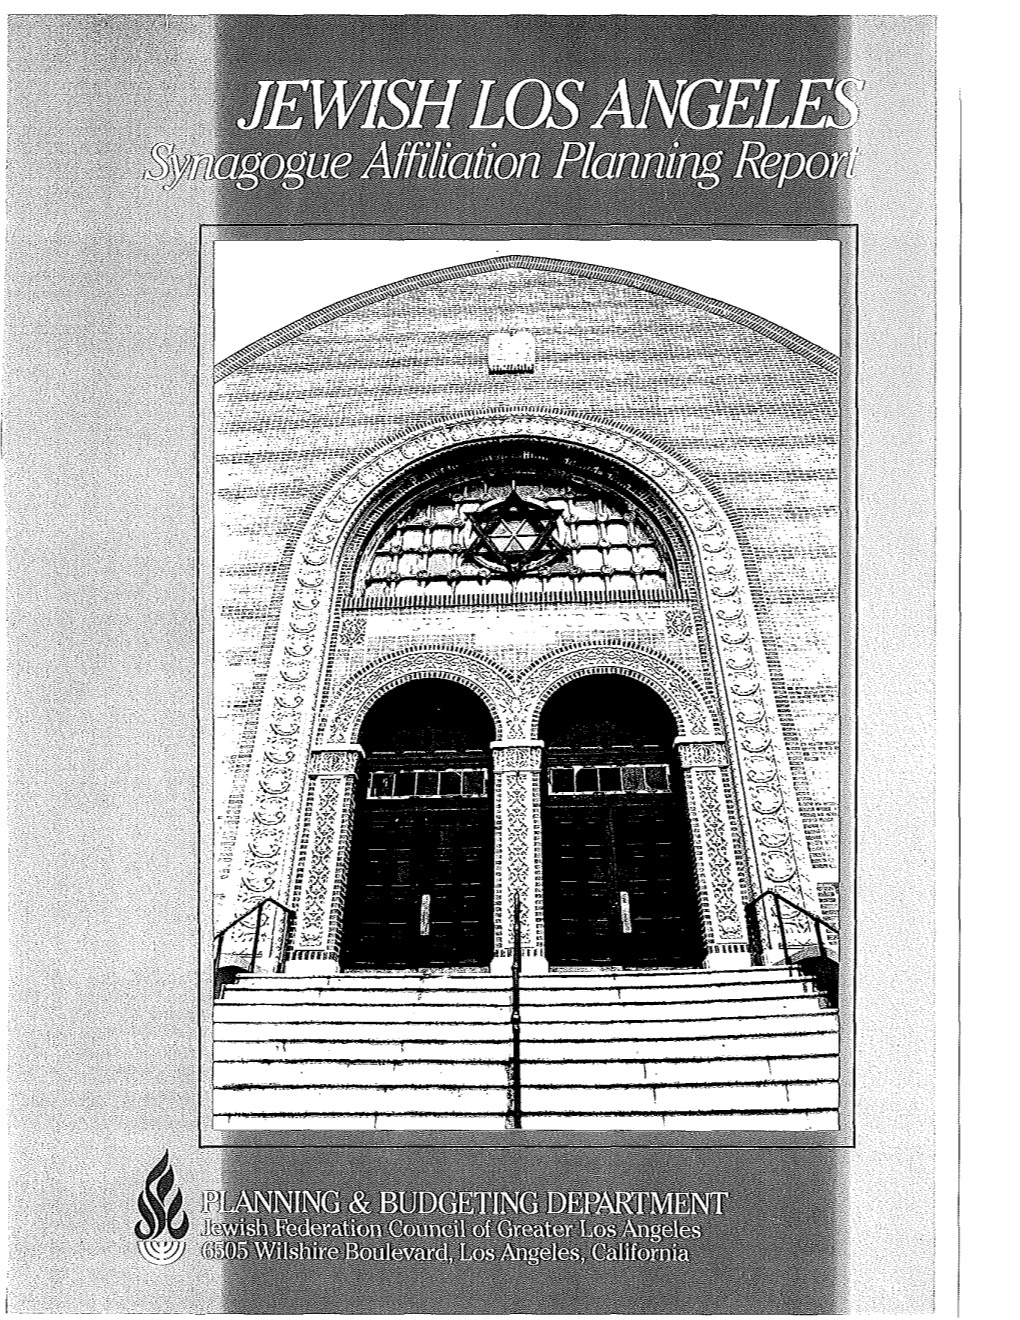 Los Angeles 1979 Synagogue Planning Report